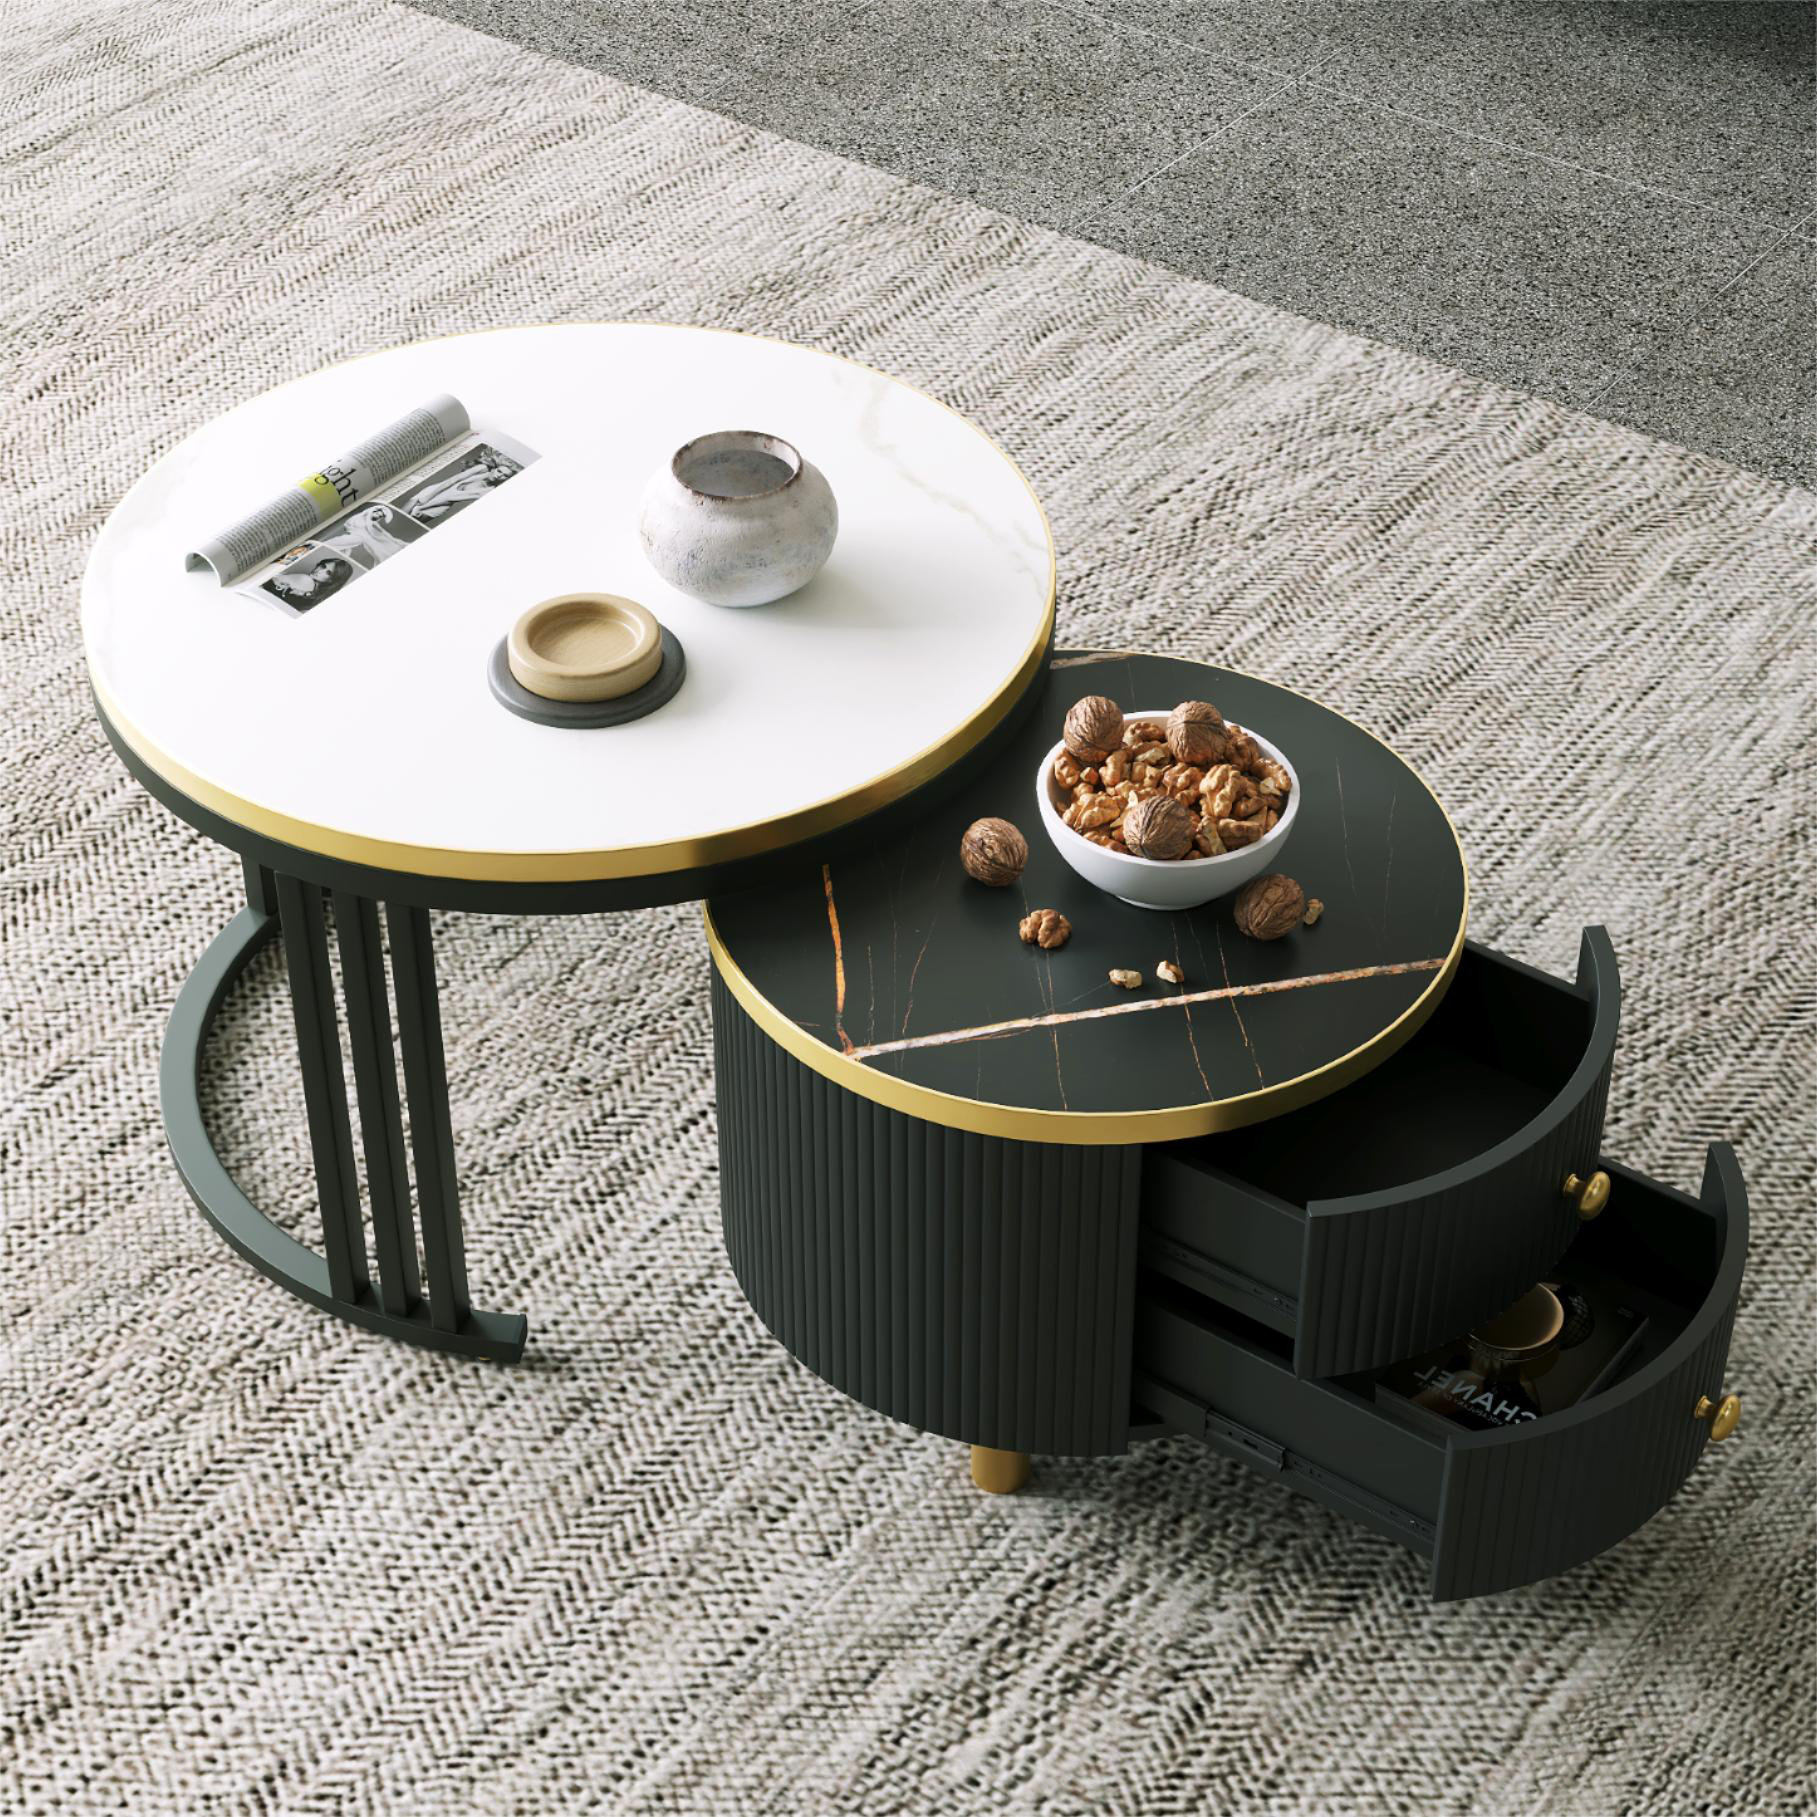 Modern Round Gold & Black Nesting Coffee Table with Shelf Tempered Glass  Top 2 Piece Set